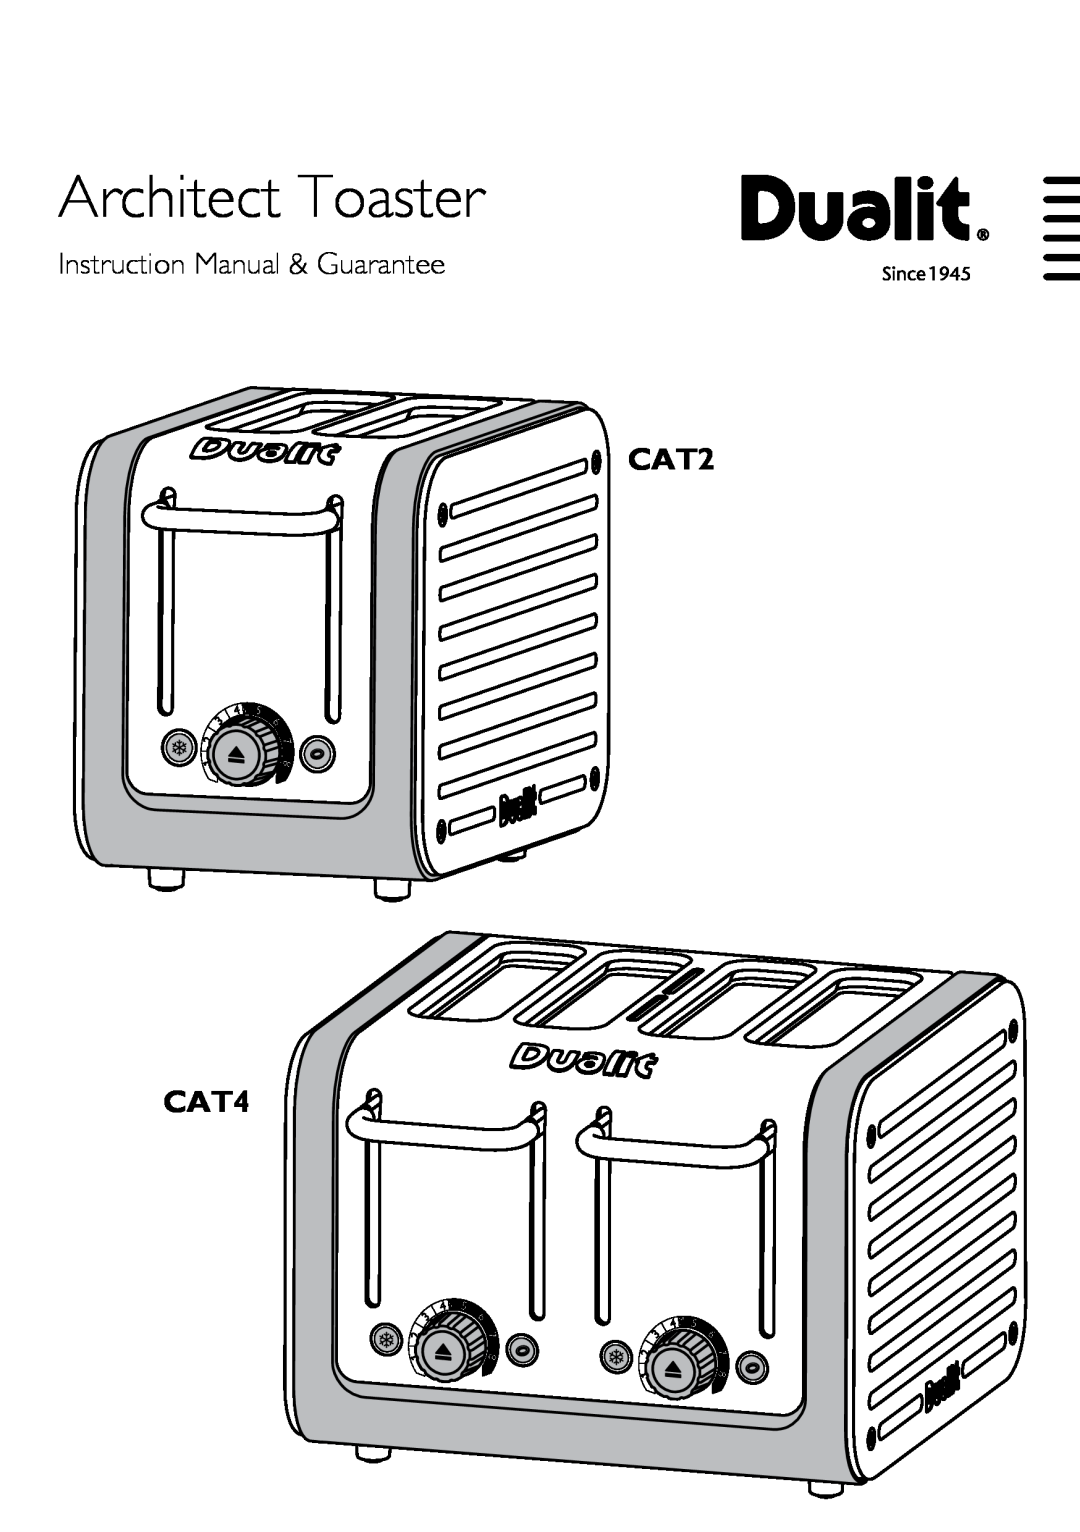 Dualit CAT2 instruction manual Precautions Safety Important, Architect Toaster, Instructions All Read, CAT4, unattended 